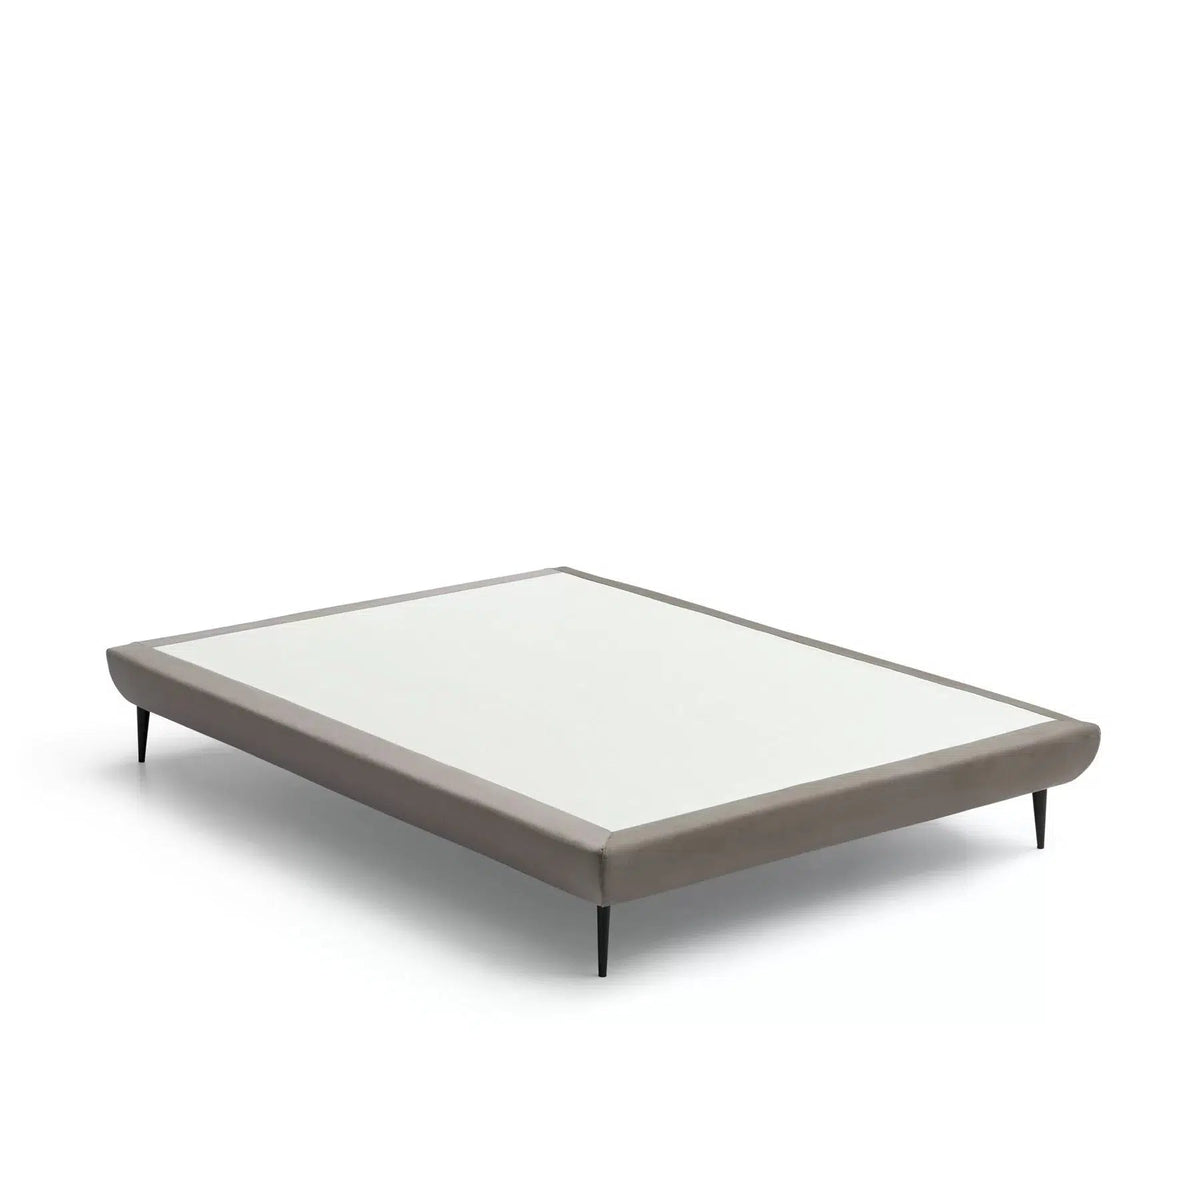 Dar 5204 Bed Base-TM Leader-Contract Furniture Store